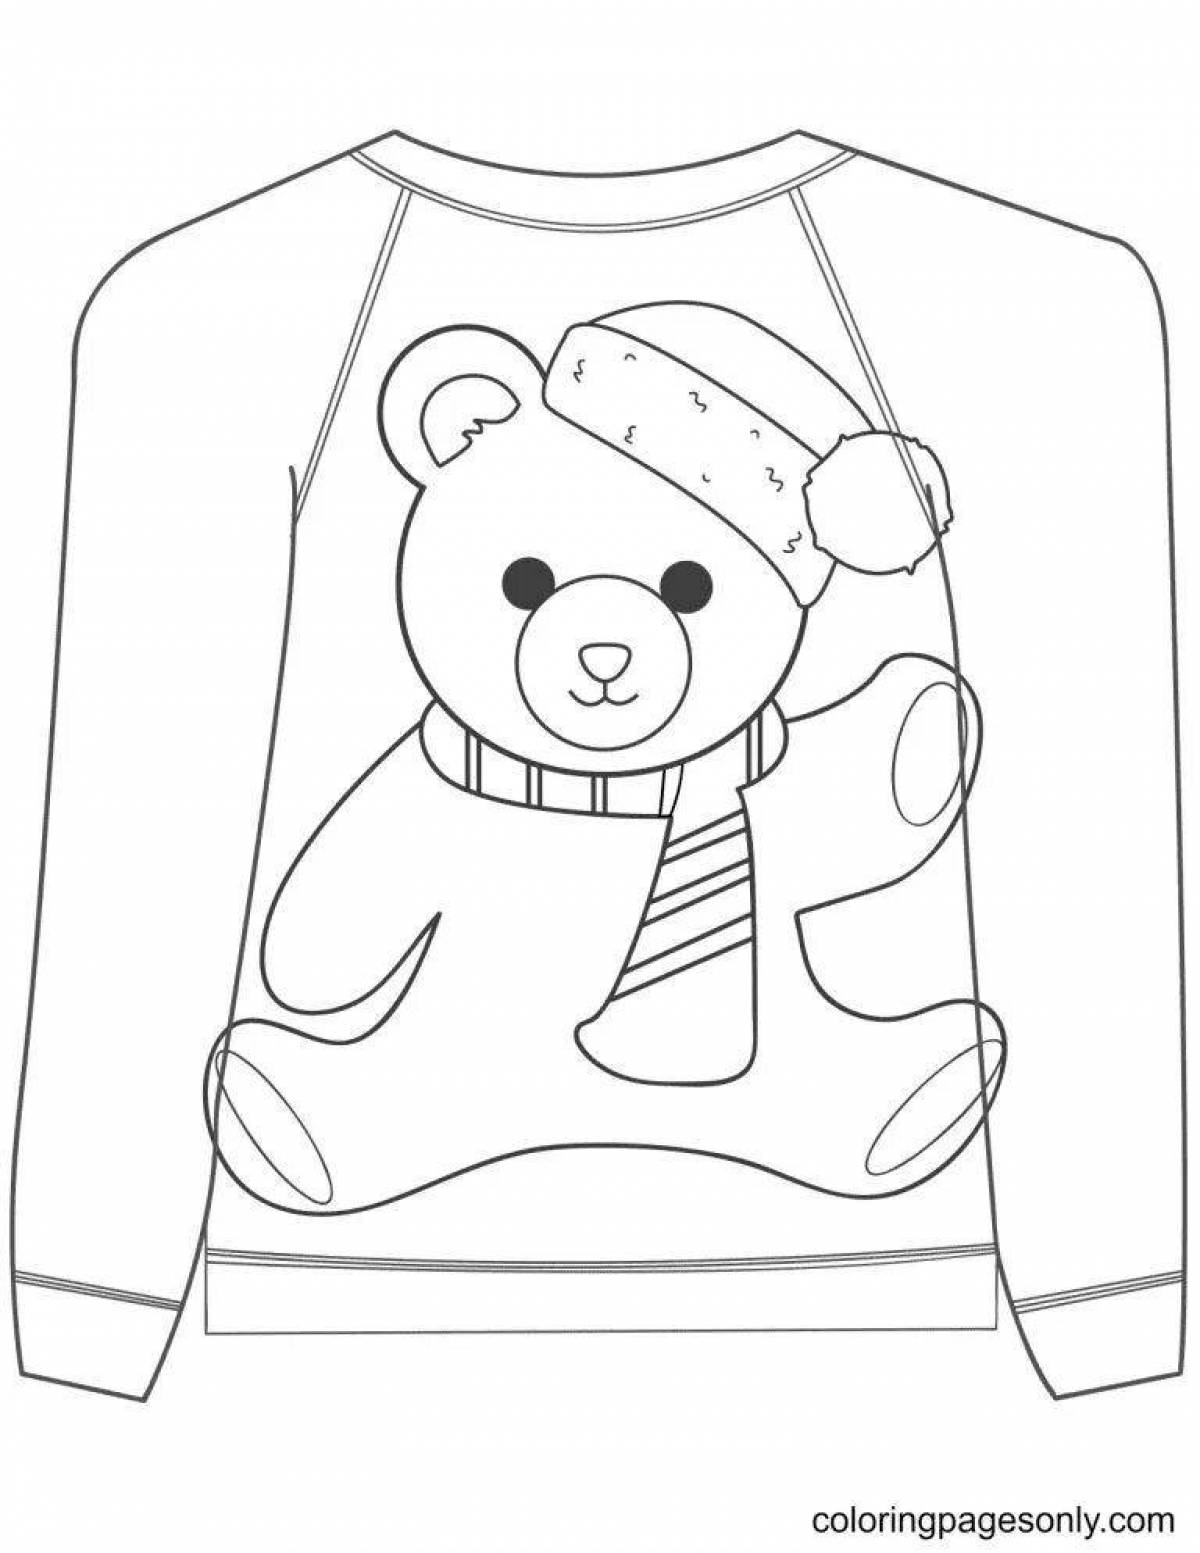 Coloring page magic sweater for kids